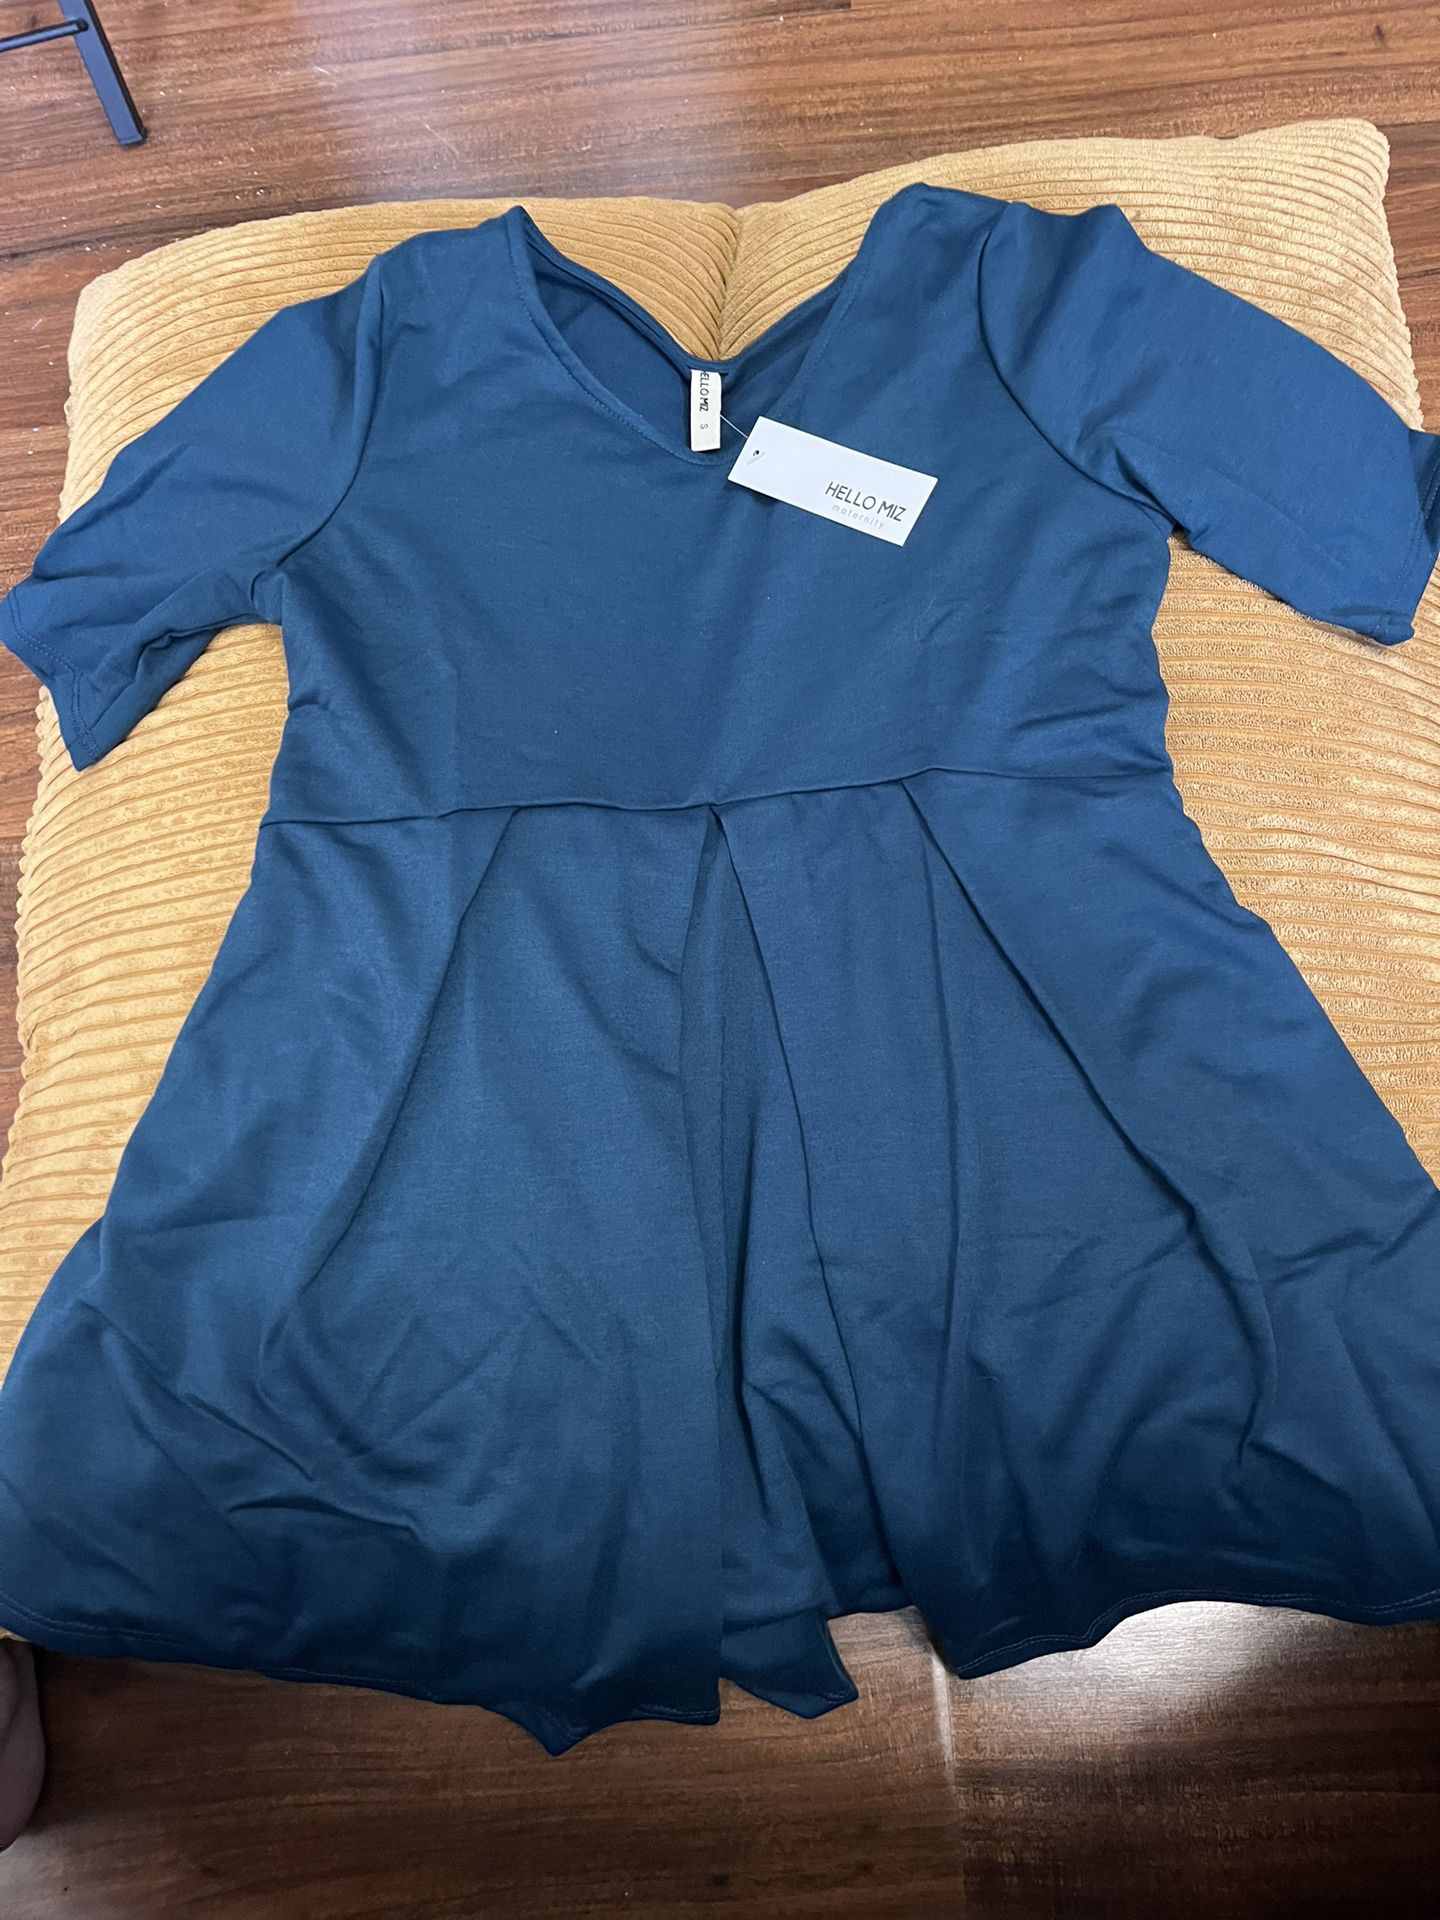 BRAND NEW MATER AND NURSING CLOTHES